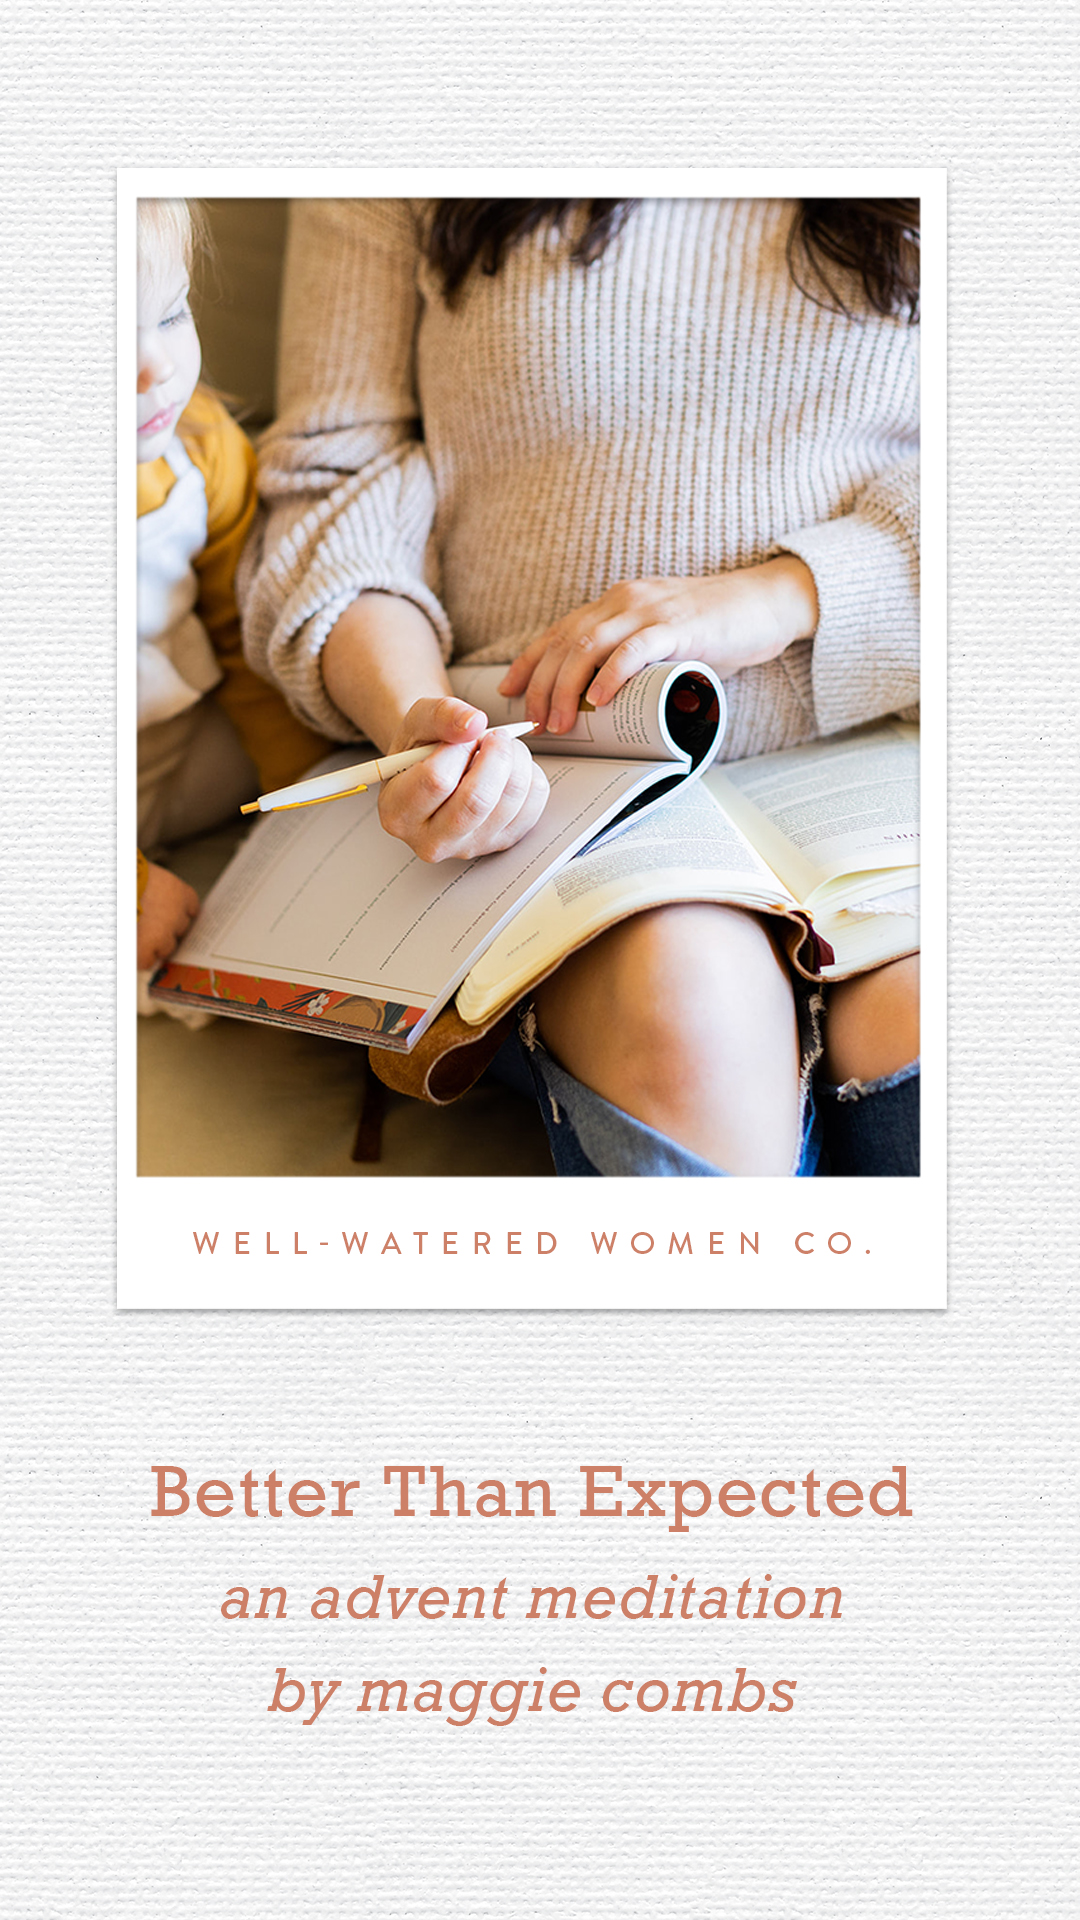 Better Than Expected-an Advent Meditation from Well-Watered Women